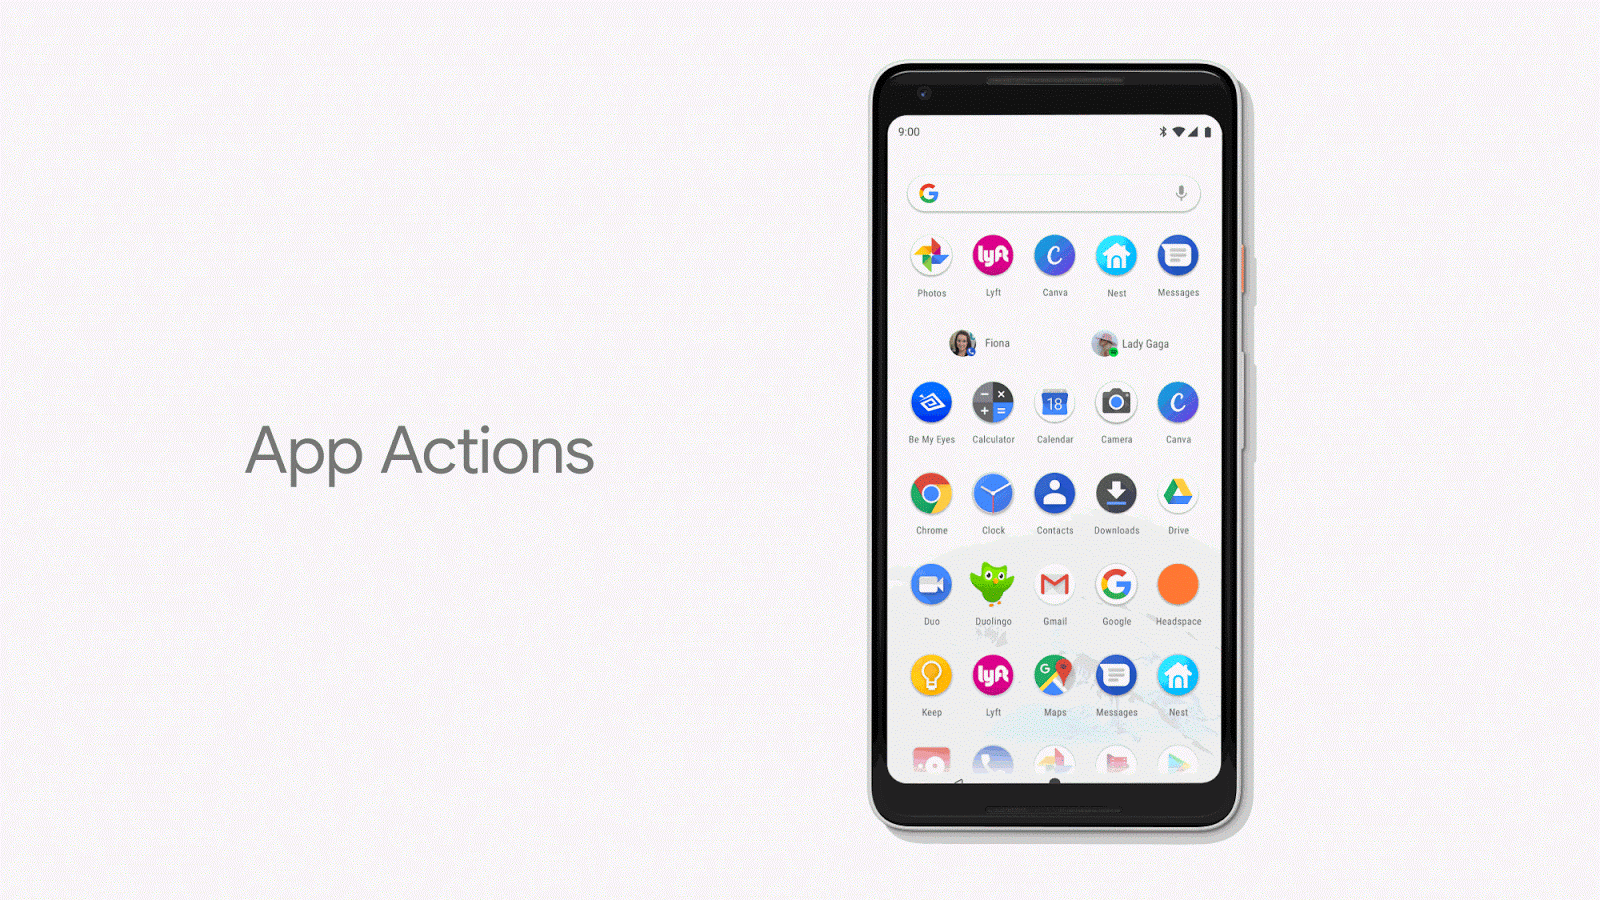 App actions feature Android P